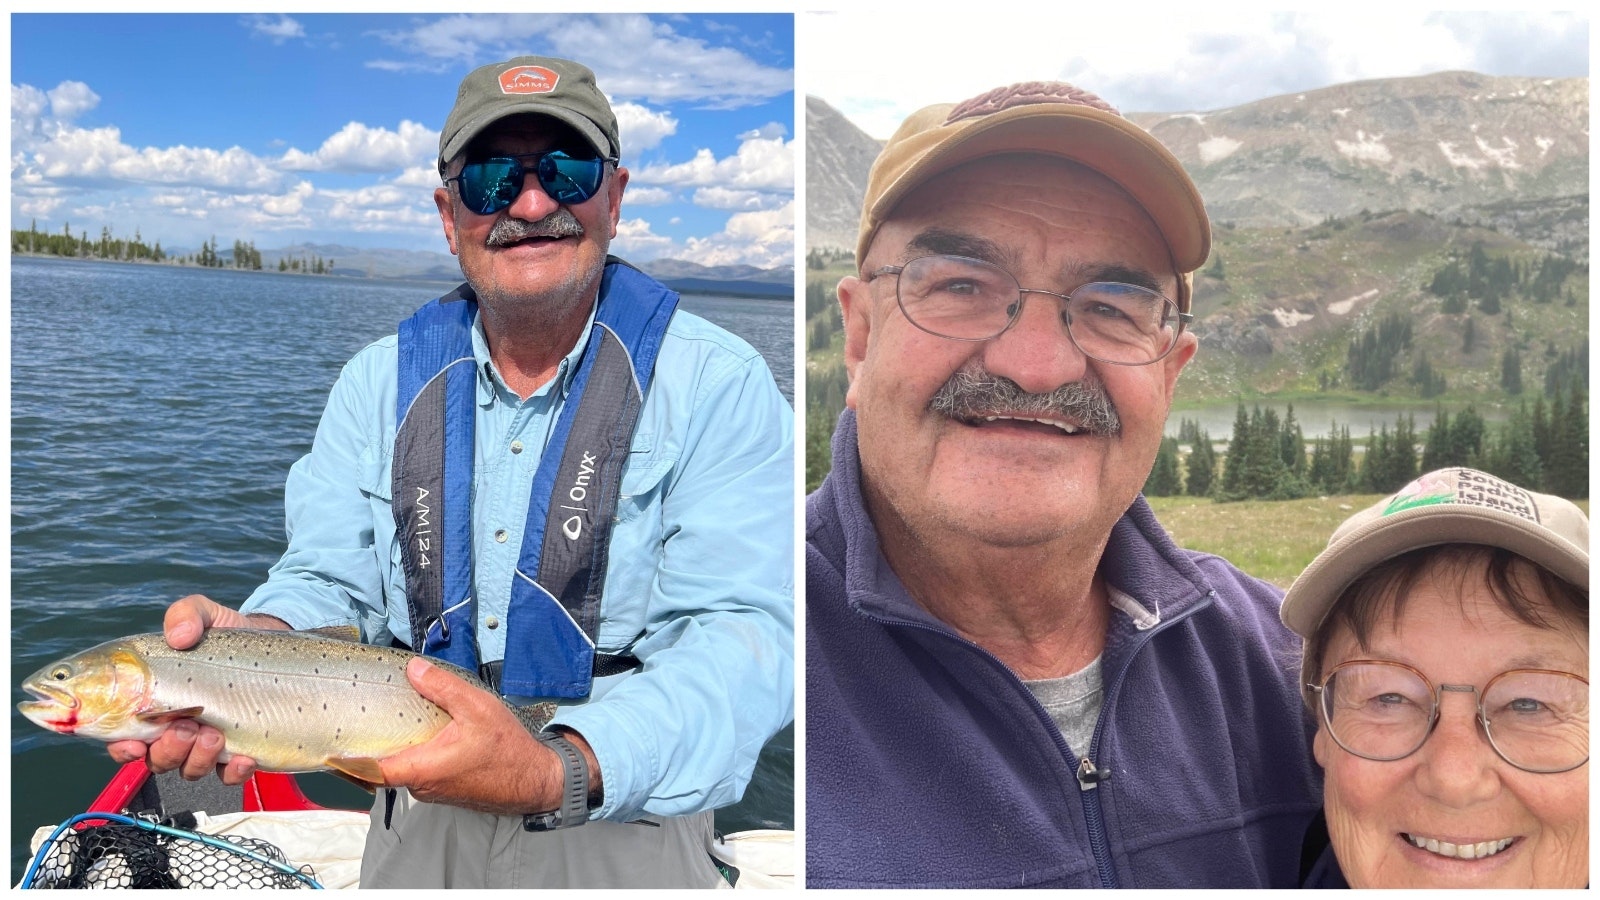 When not presiding over Wyoming's most important legal cases and decisions as a state Supreme Court justice, Keith Kautz enjoys the Wyoming outdoors with his wife of 49 years, Karen.